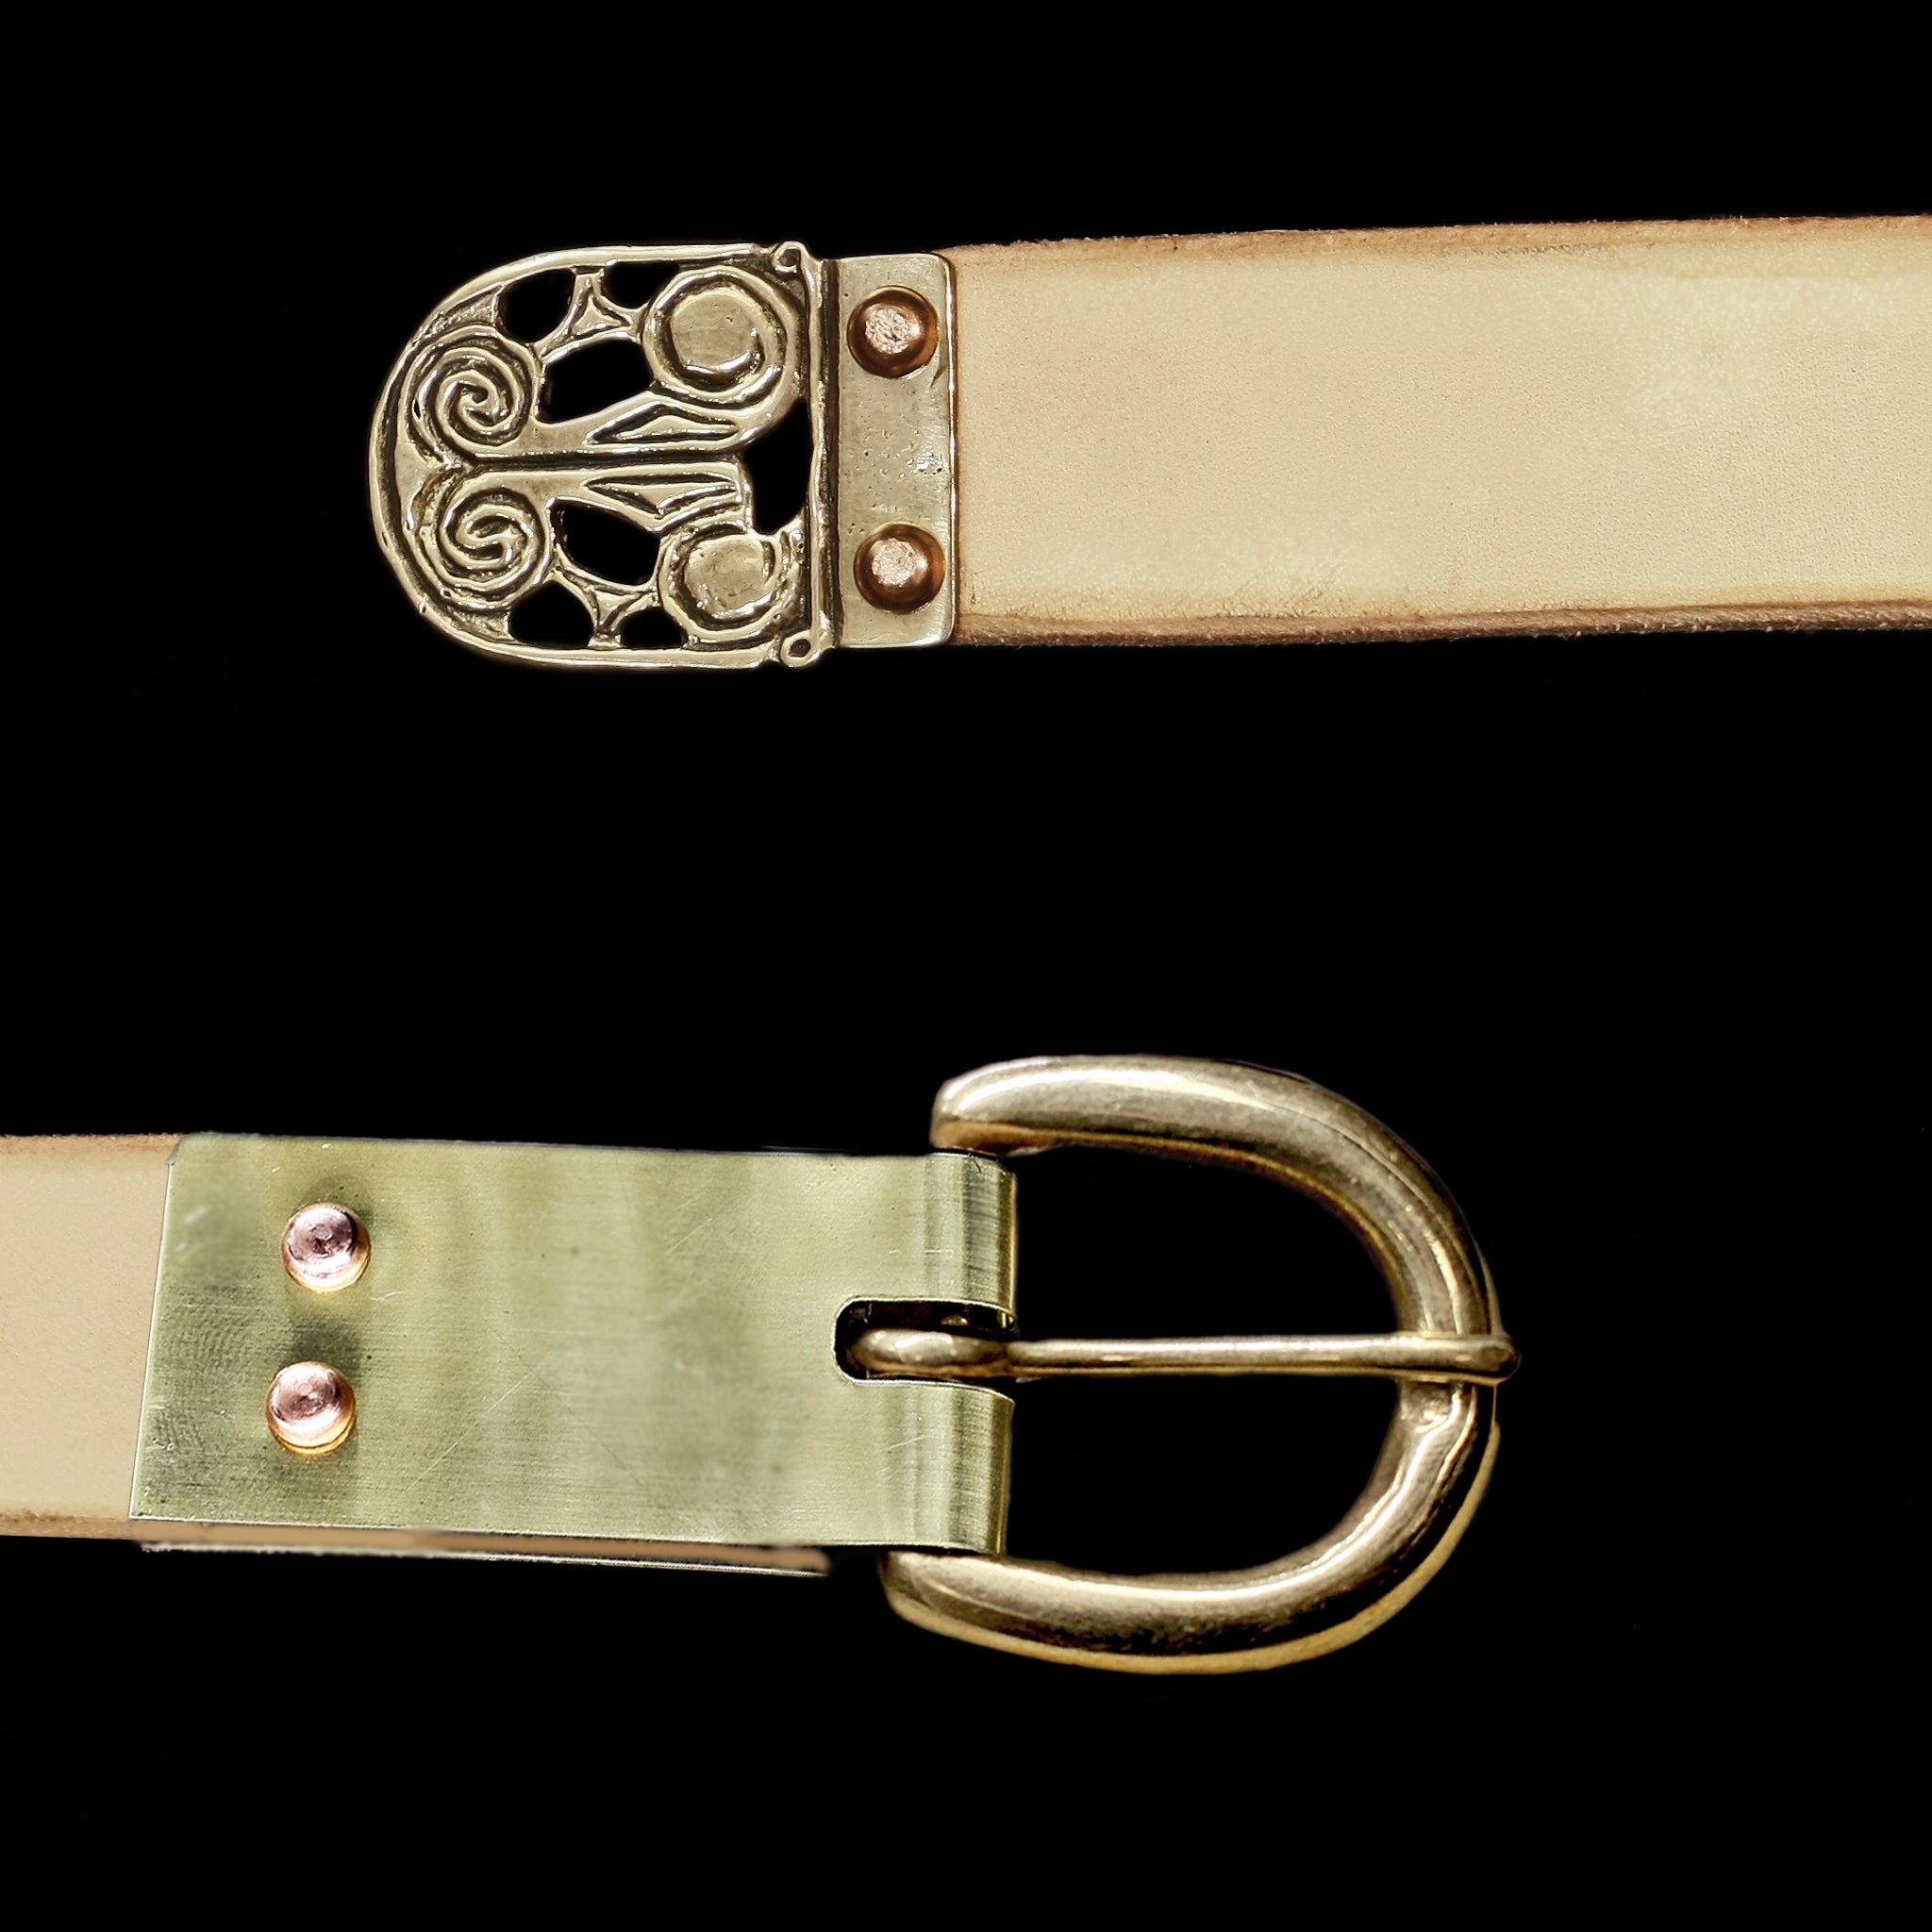 Custom Made 25mm (1 inch) Wide Leather Viking Belt with Brass Buckle, Plain Brass Buckle Plate & Hiberno Norse Bronze Strap End